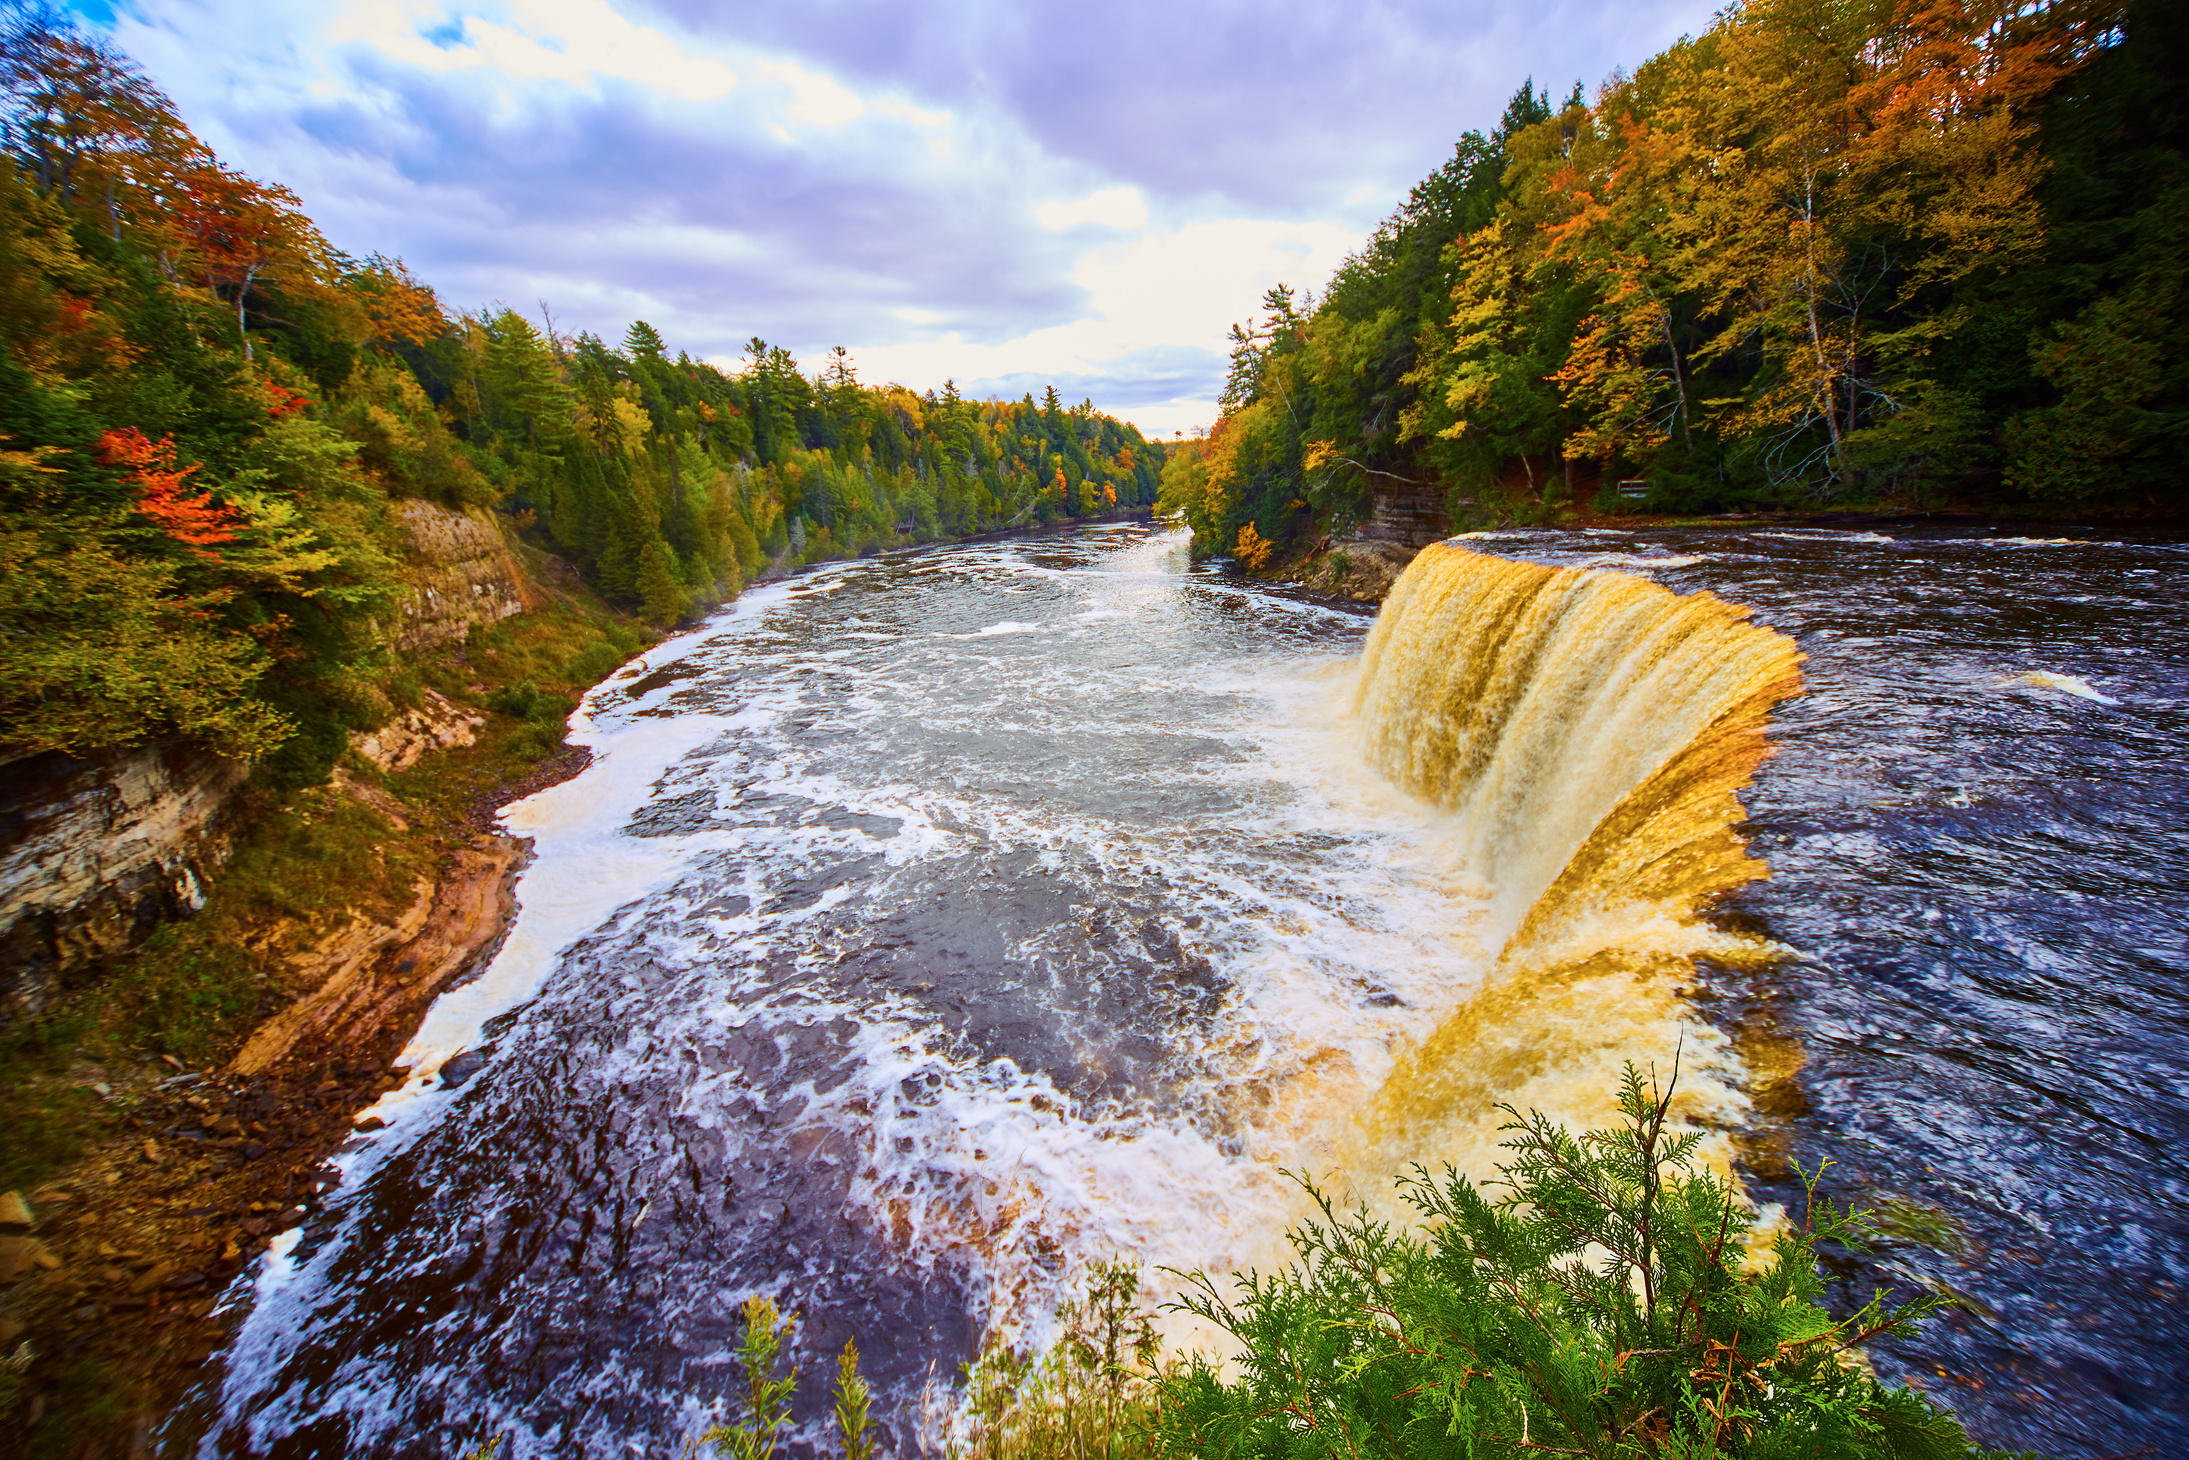 Tahquamenon Falls Waterfall with Large Basin, White Flowing Rive